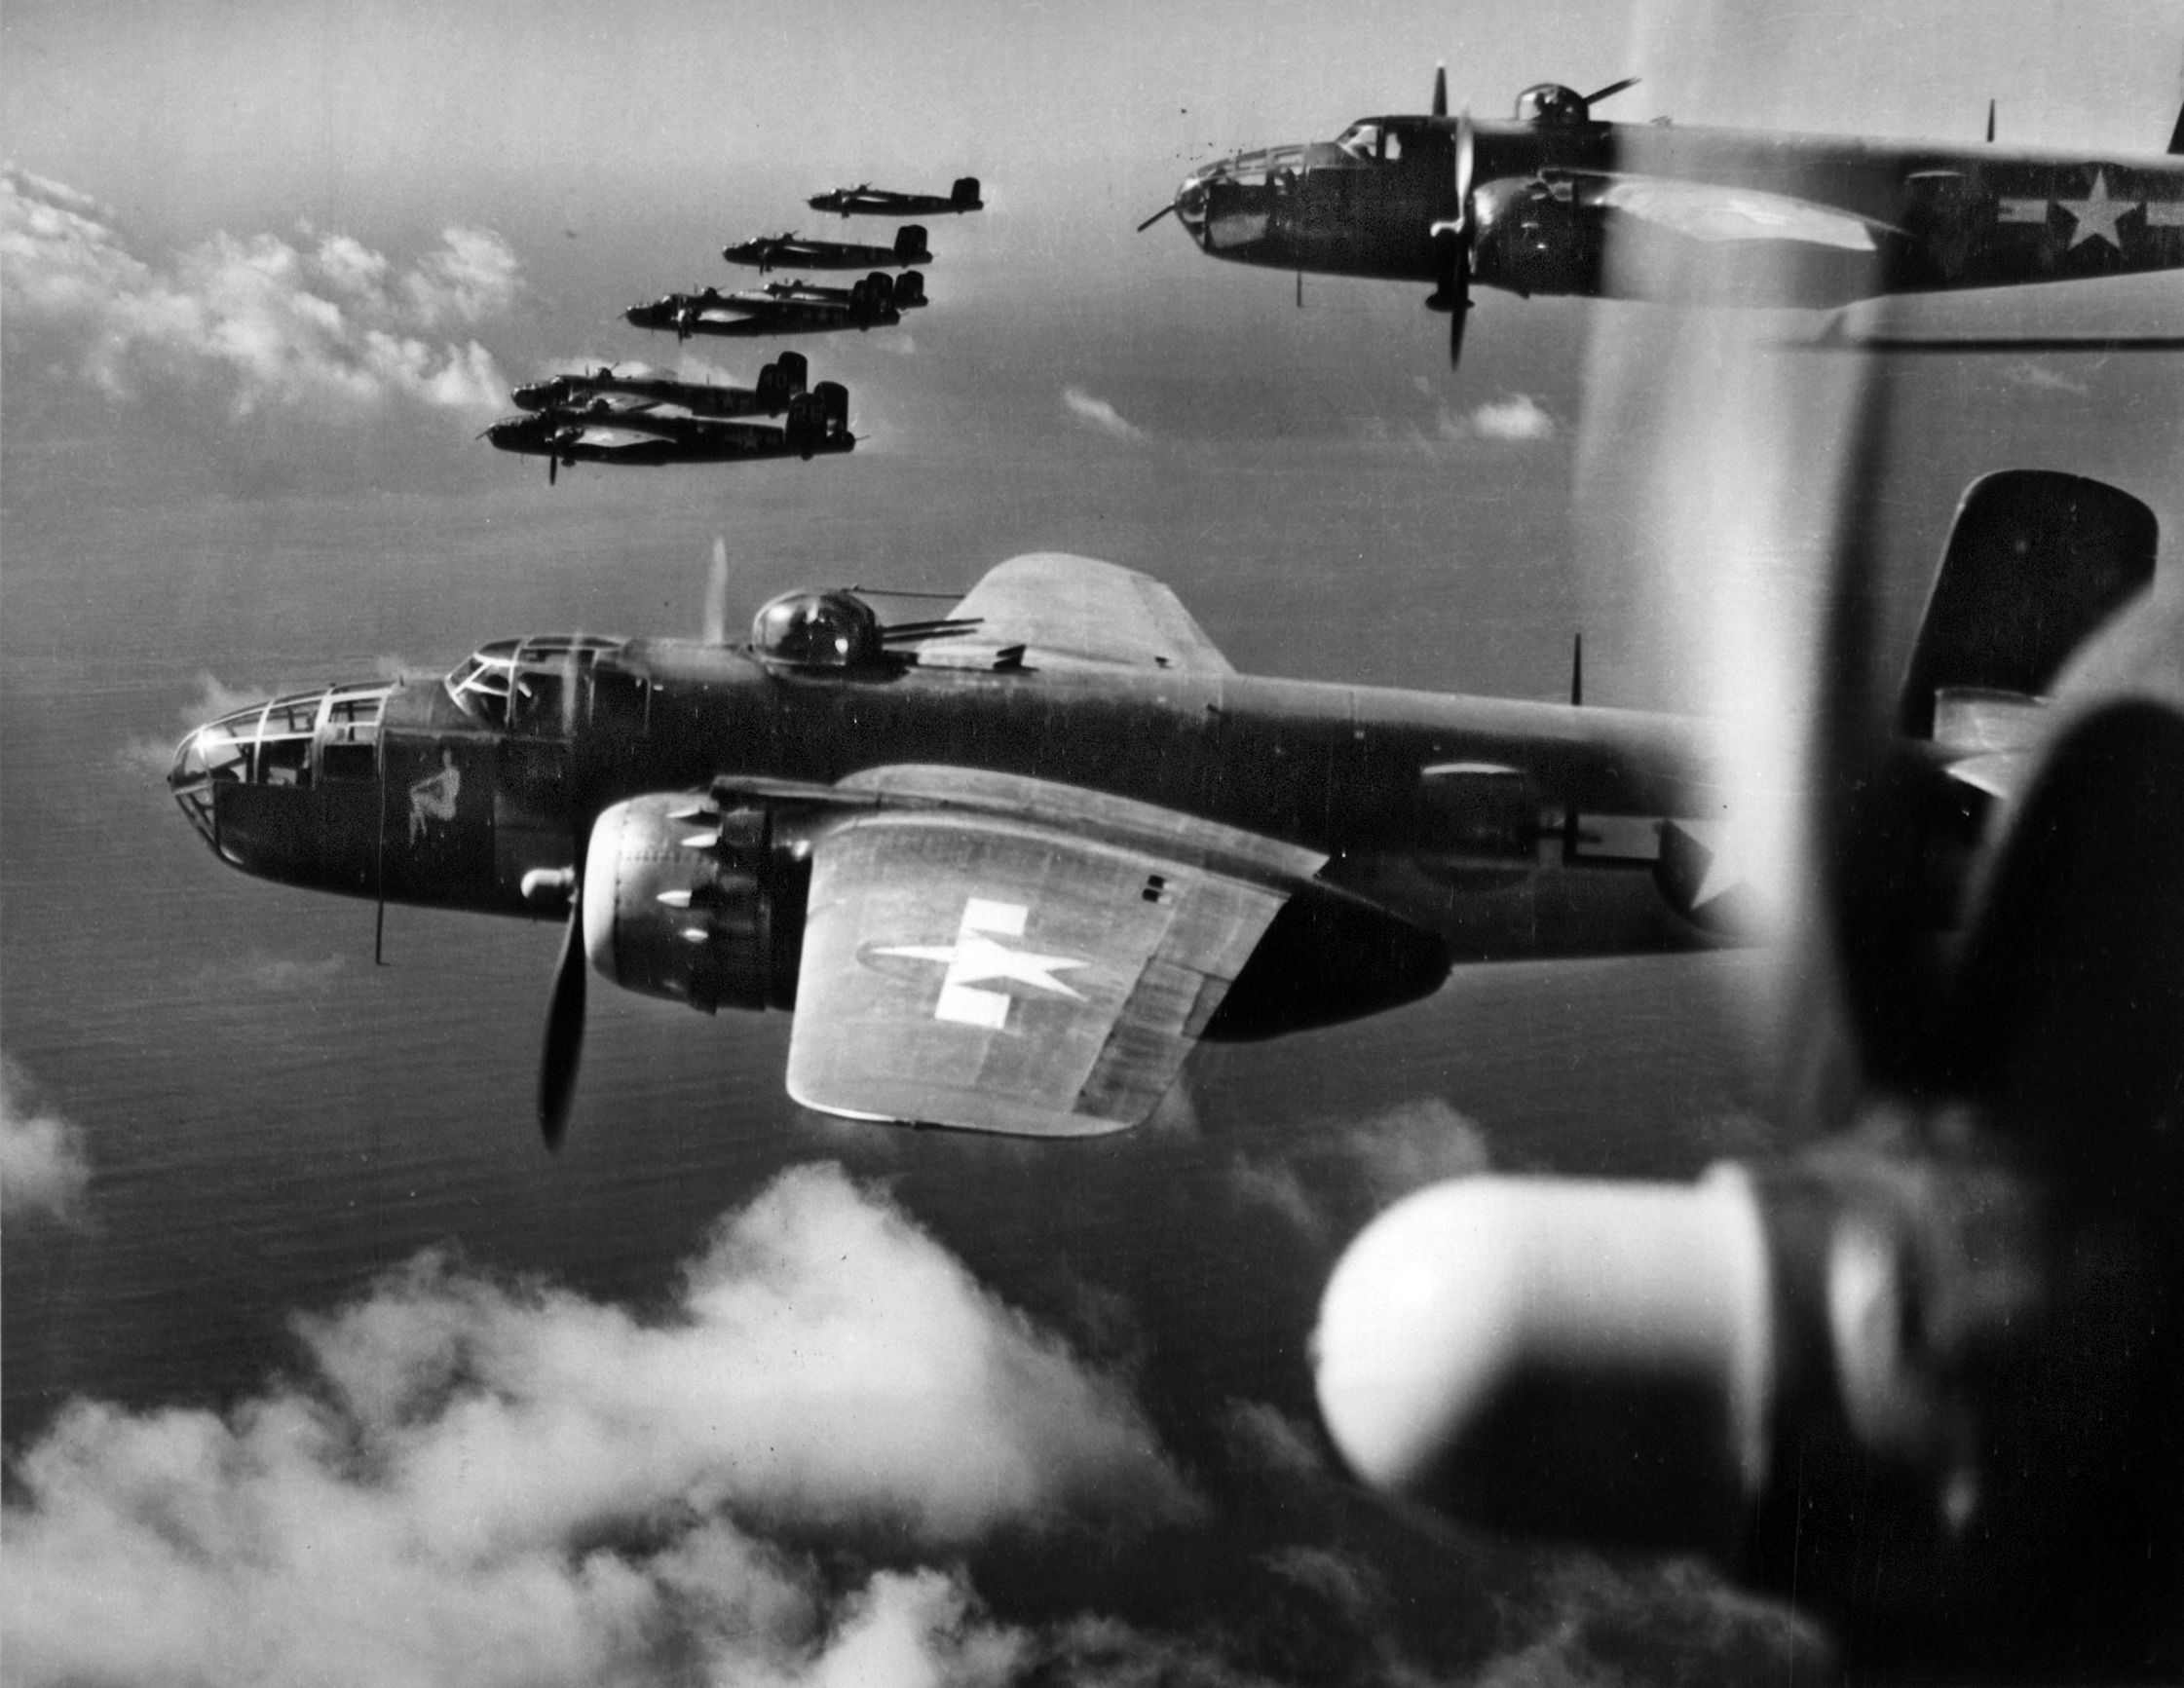 A squadron of B-25 bombers speeds its way toward a rail yard, the target of this mission during the Italian campaign. The B-25s regularly bombed rail yards in northern Italy to prevent the movement of German reinforcements and equipment toward the front lines to the south.